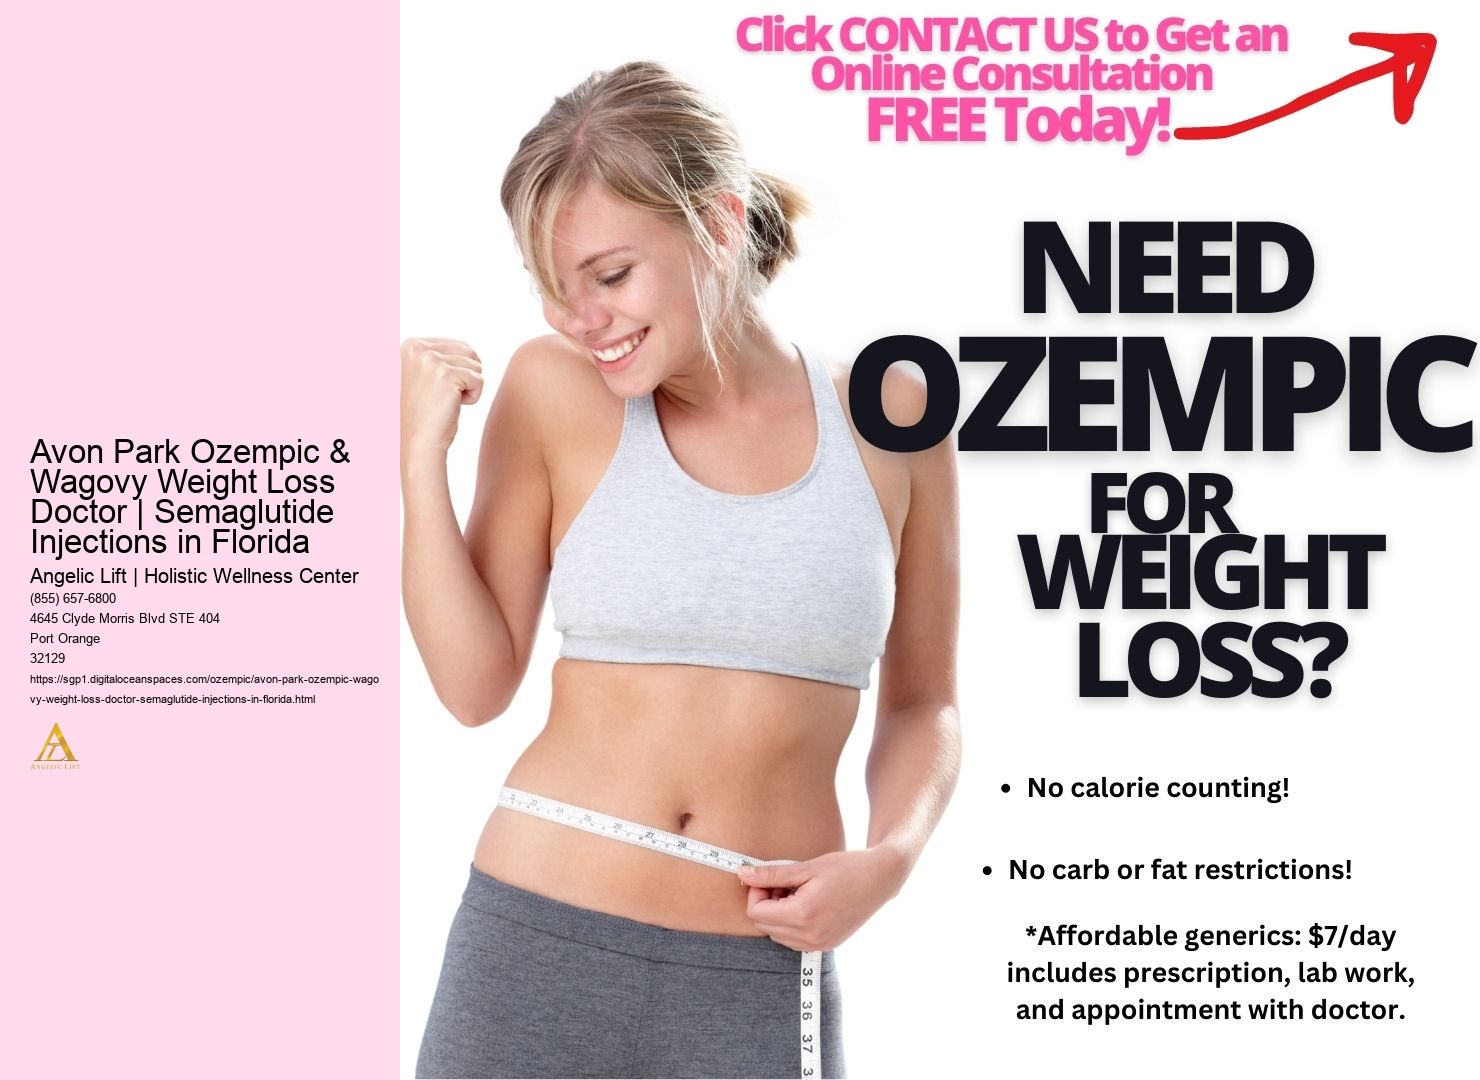 Avon Park Ozempic & Wagovy Weight Loss Doctor | Semaglutide Injections in Florida